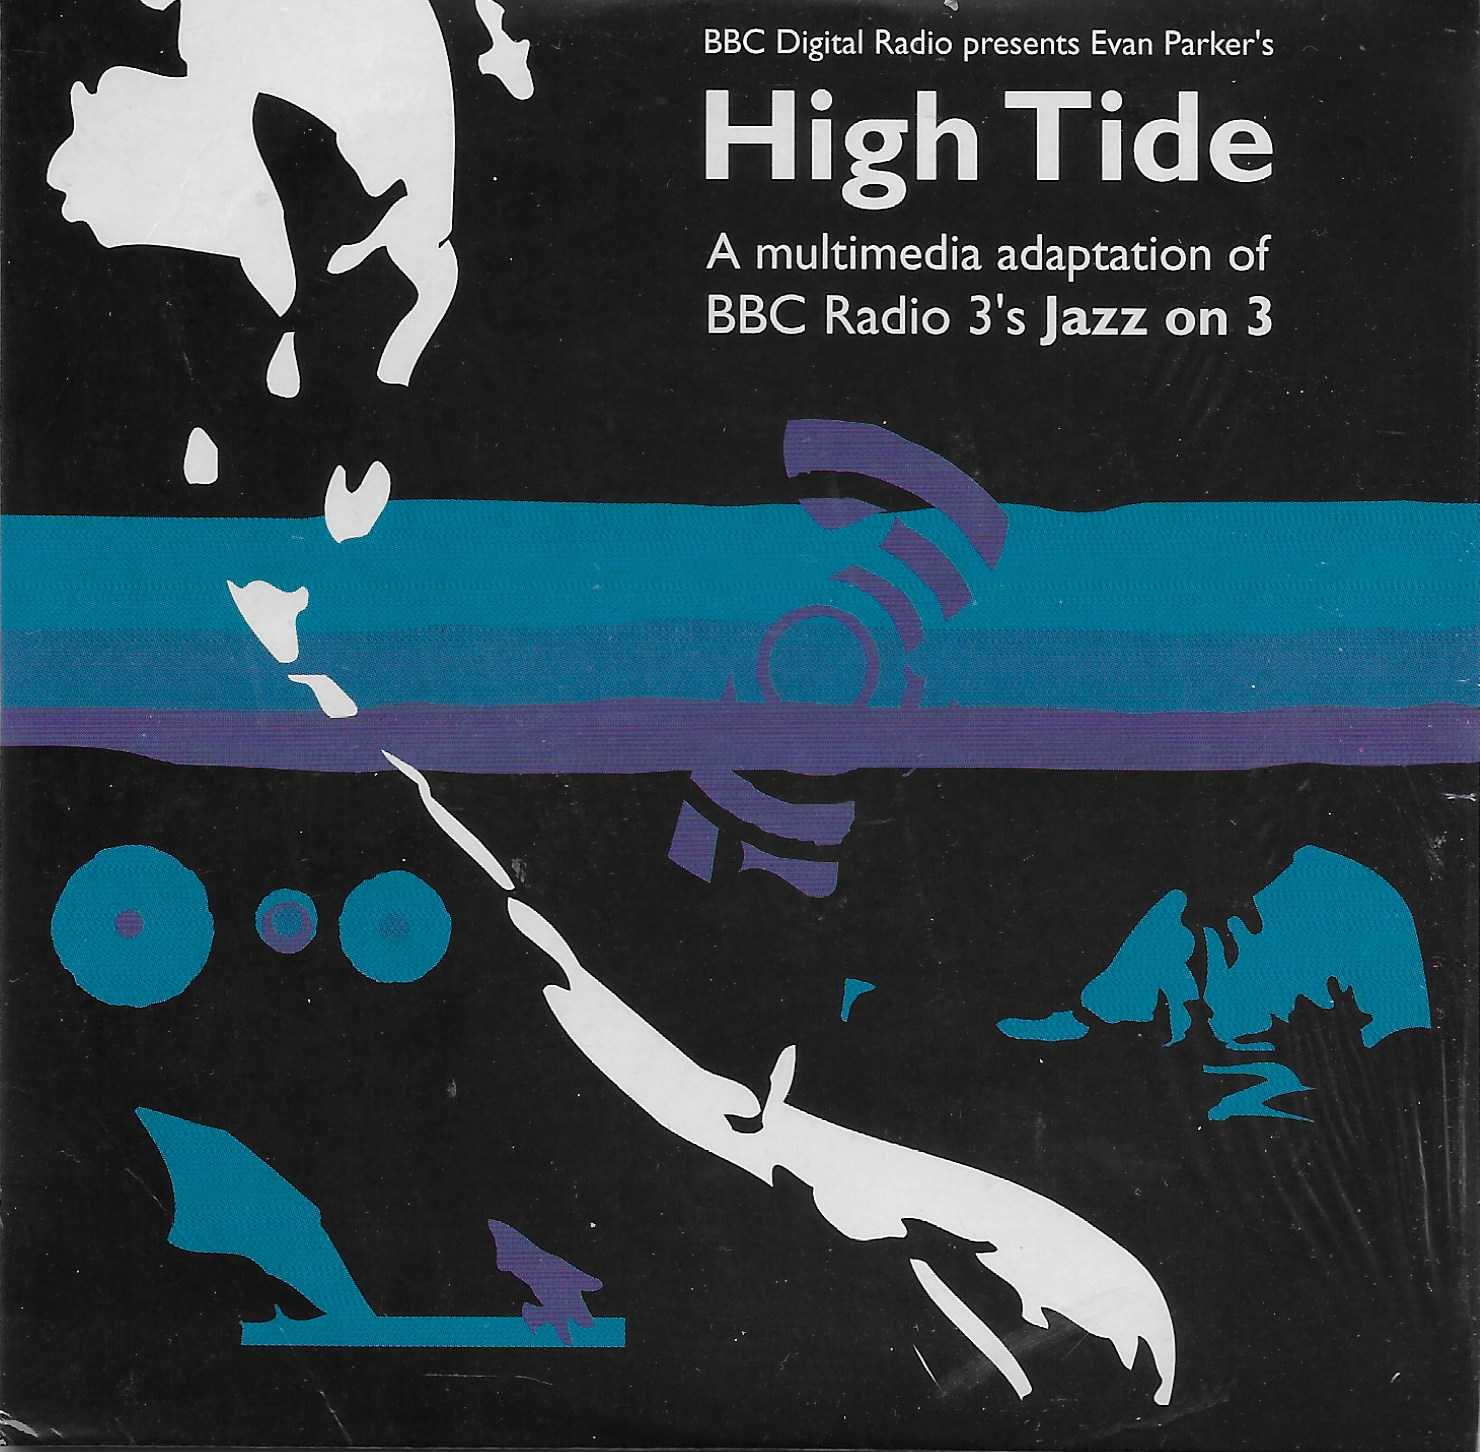 Picture of High tide by artist Evan Parker from the BBC cds - Records and Tapes library